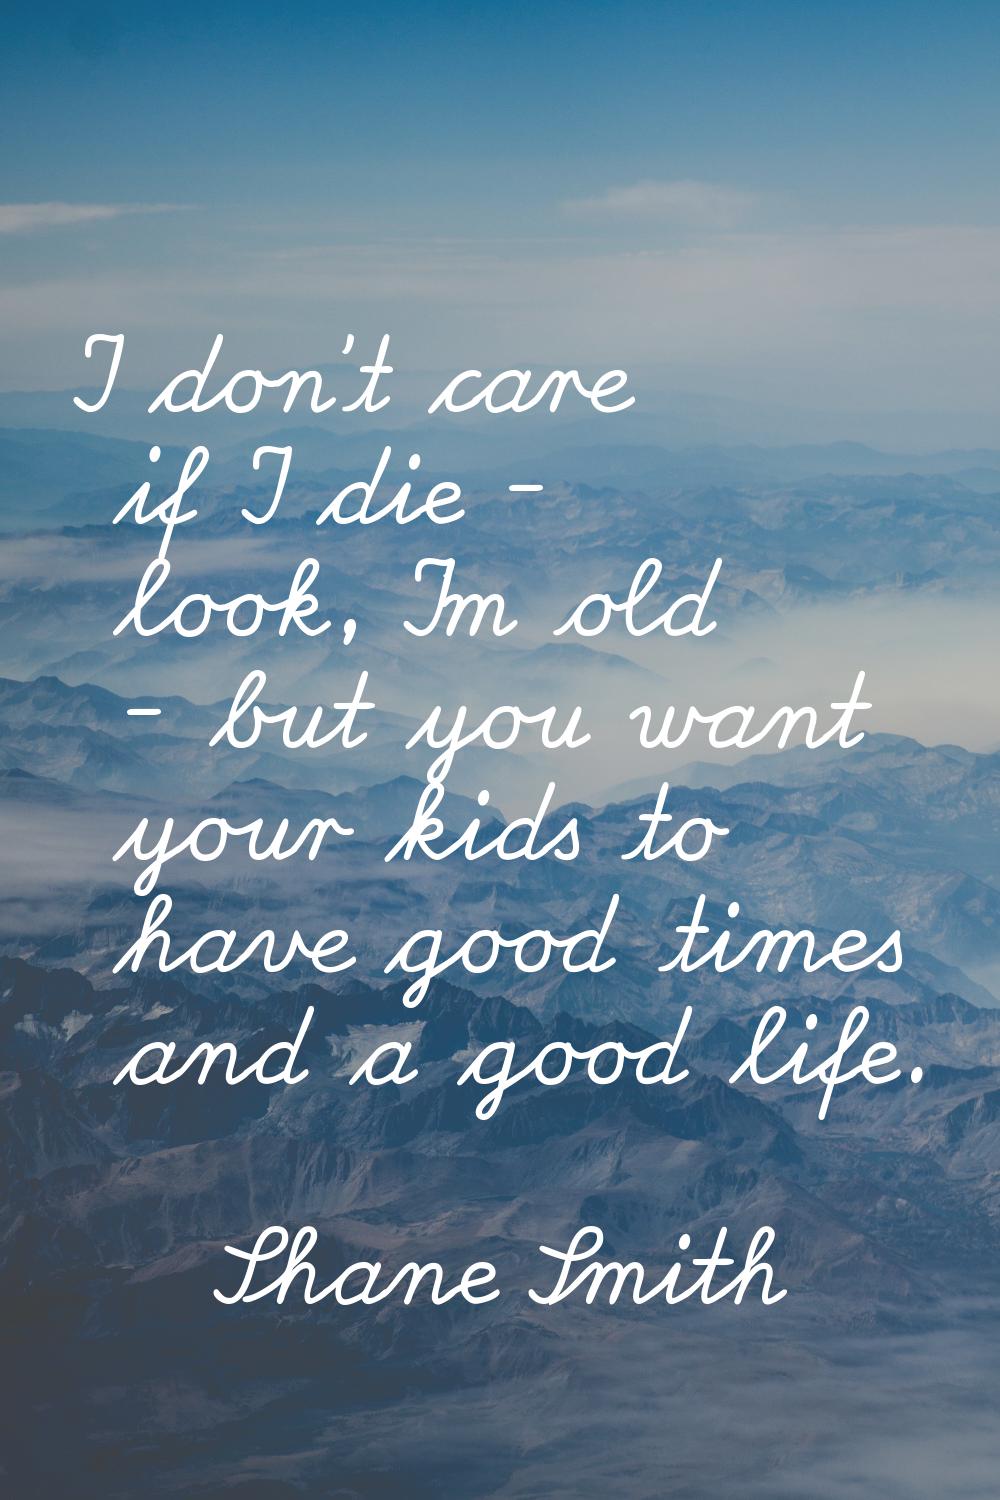 I don't care if I die - look, I'm old - but you want your kids to have good times and a good life.